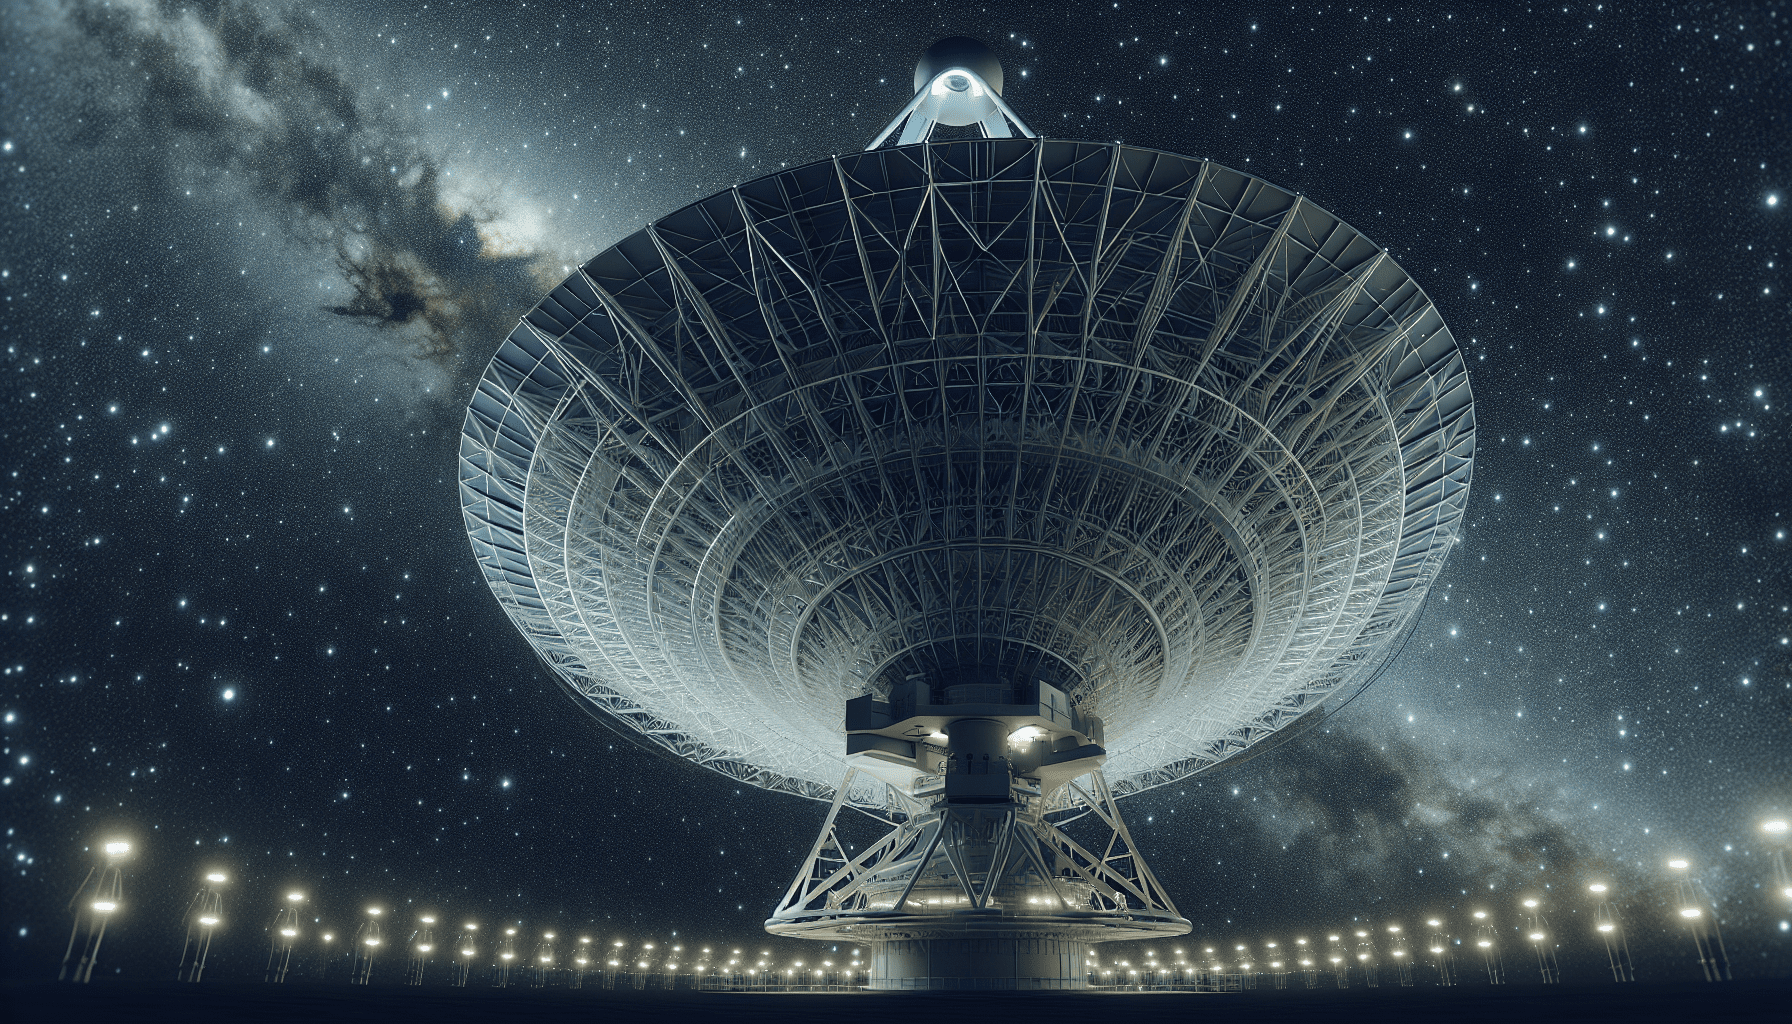 The Best Ways To Connect With Alien Researchers At Secret Bases